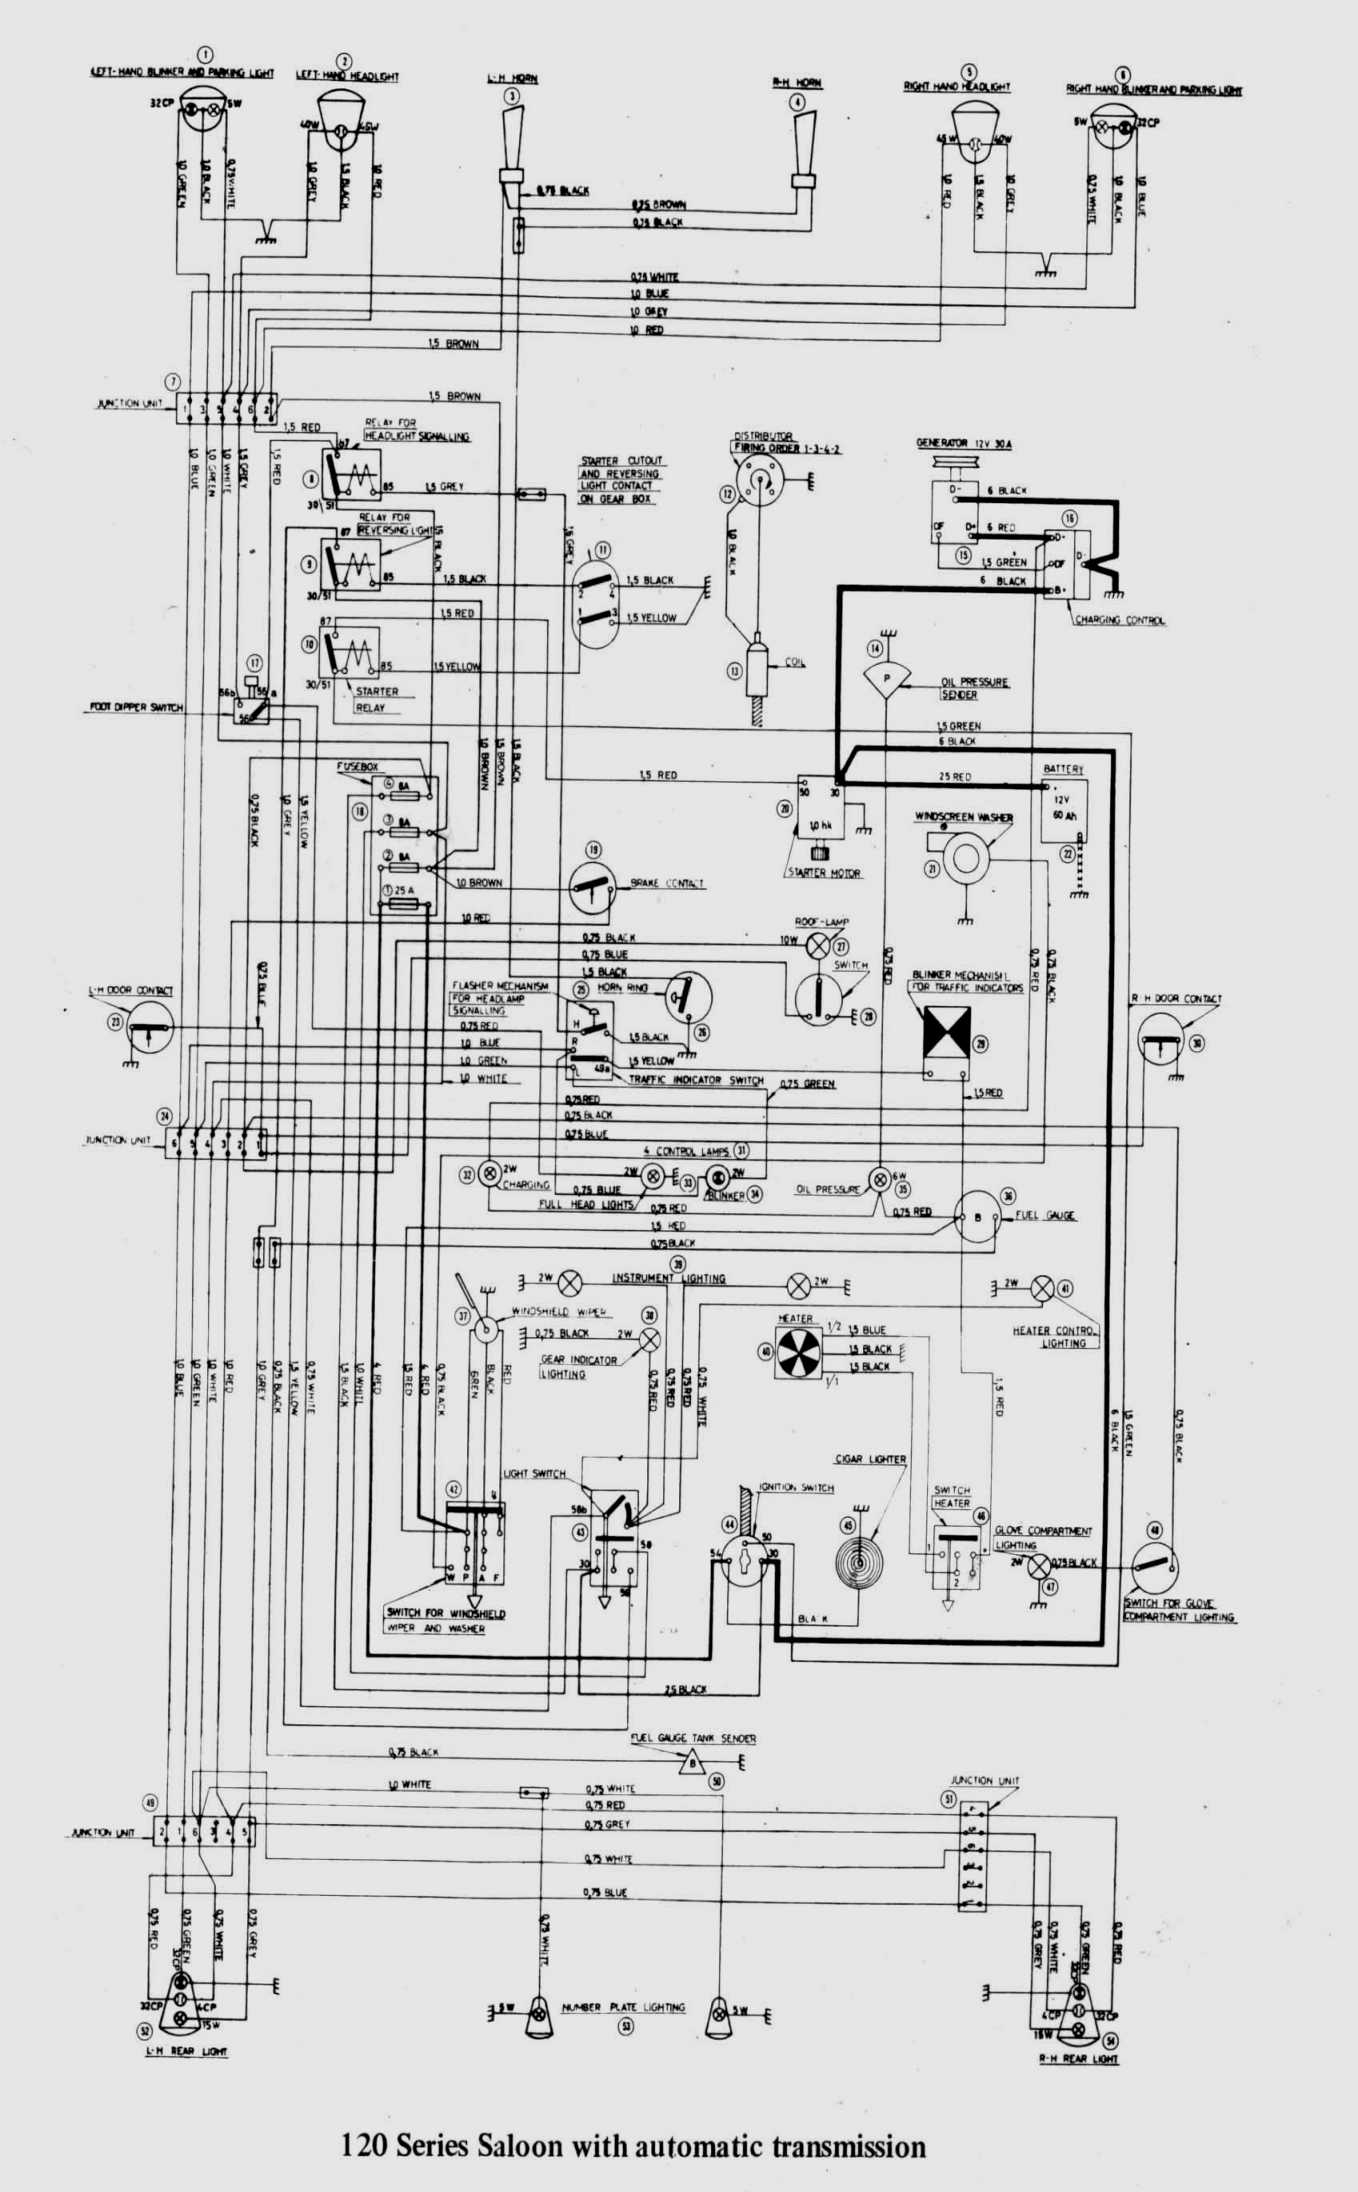 New Holland Skid Steer Parts Diagram New Holland 850 Wiring Diagram Wiring Diagram Content